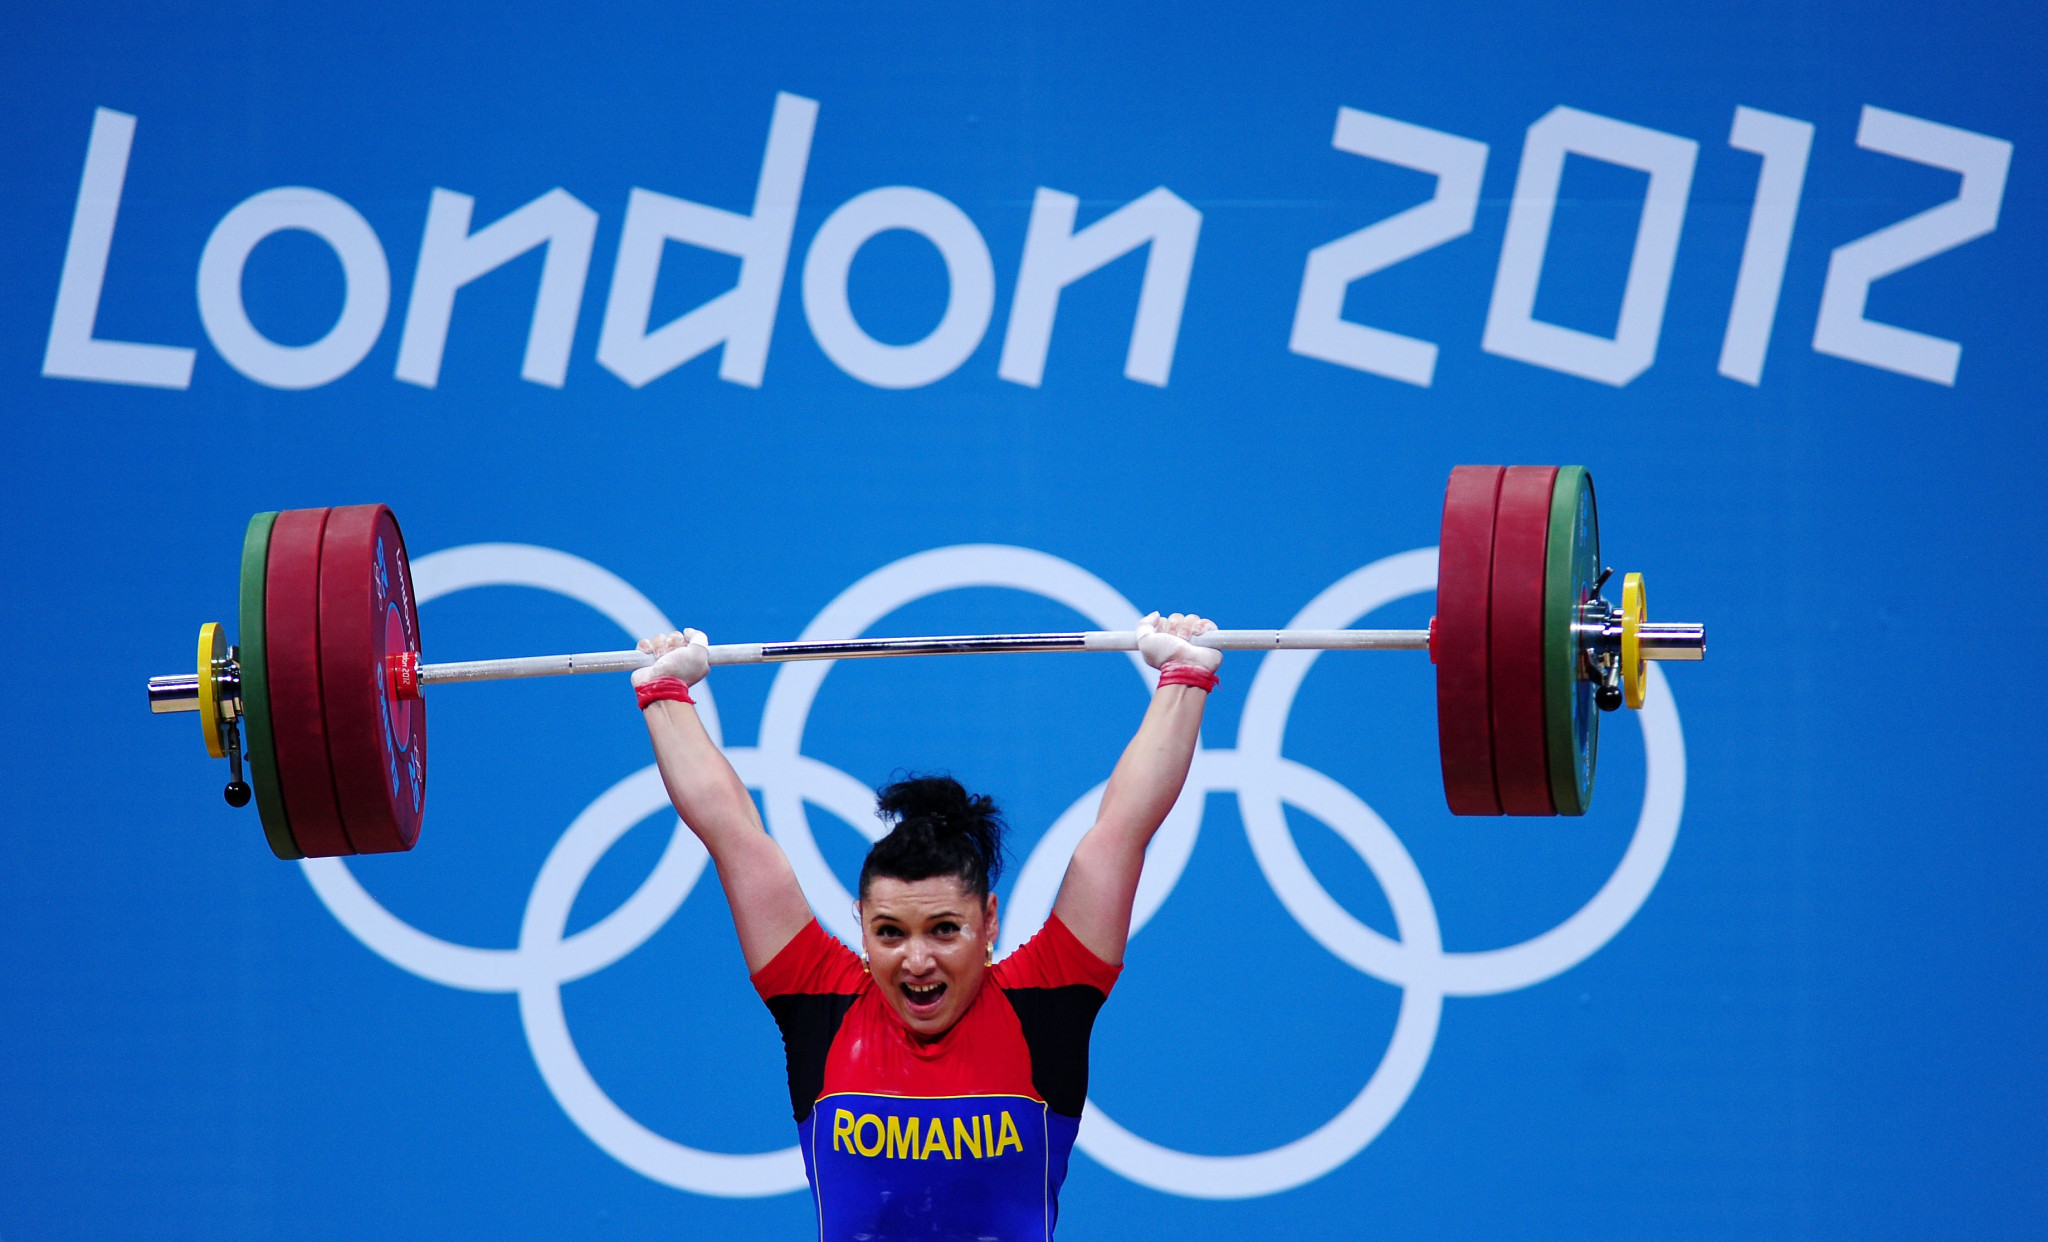 Roxana Cocoș won a medal at London 2012, only to be disqualified along with the entire Romanian weightlifting team ©Getty Images